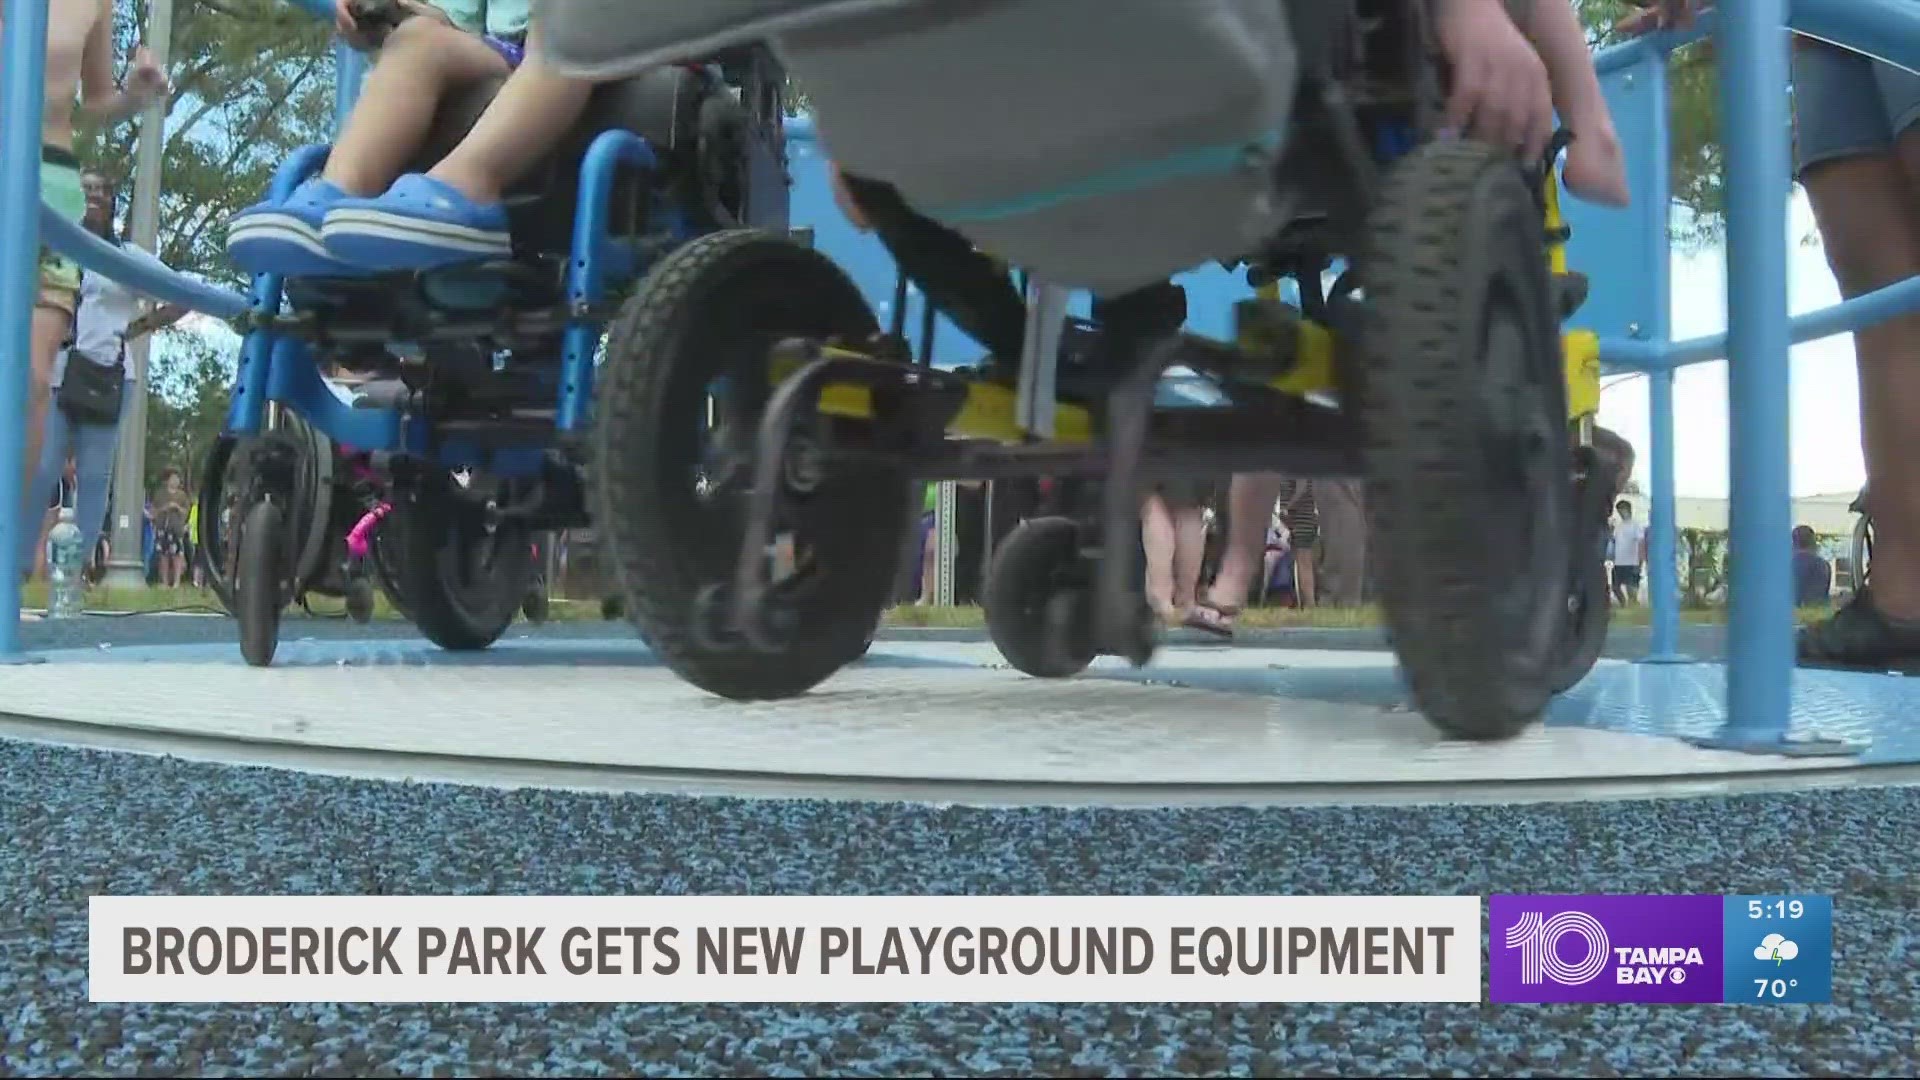 Teachers say the new equipment has been a great addition to their playground.